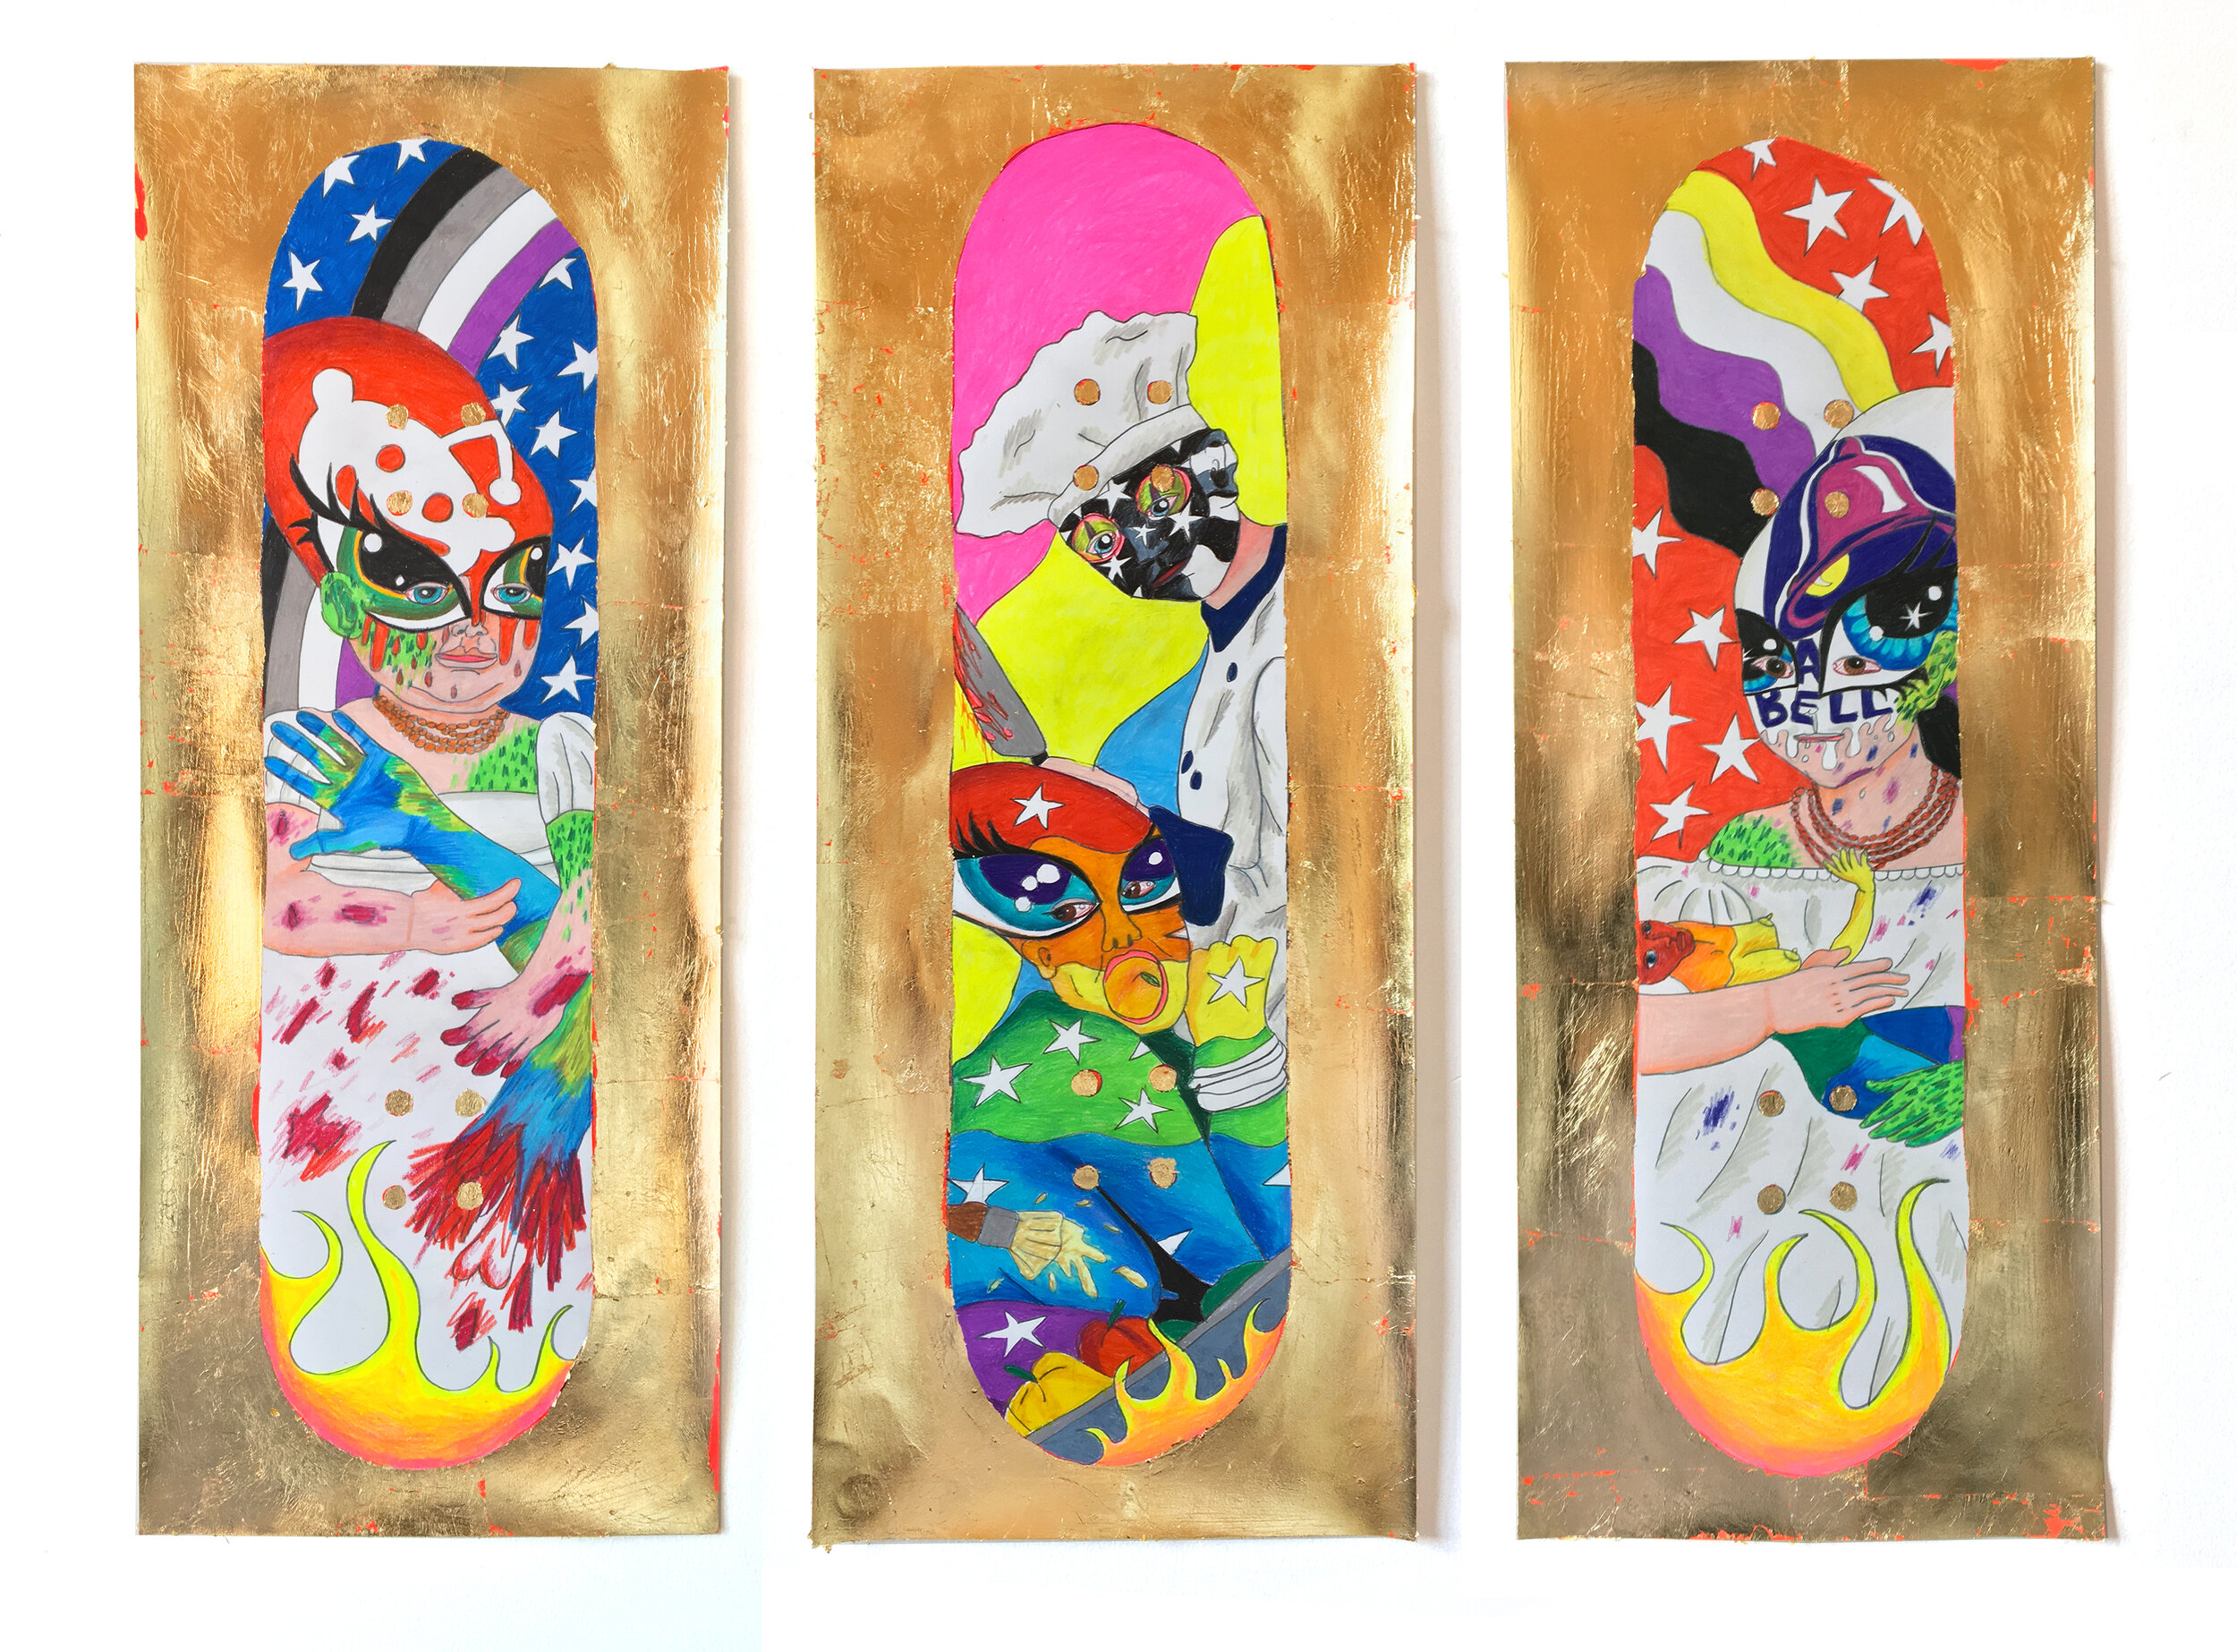   Skateboard Triptych , 2019  Colored pencil, acrylic paint, and gold leaf on paper  Private collection, Princeton, NJ 